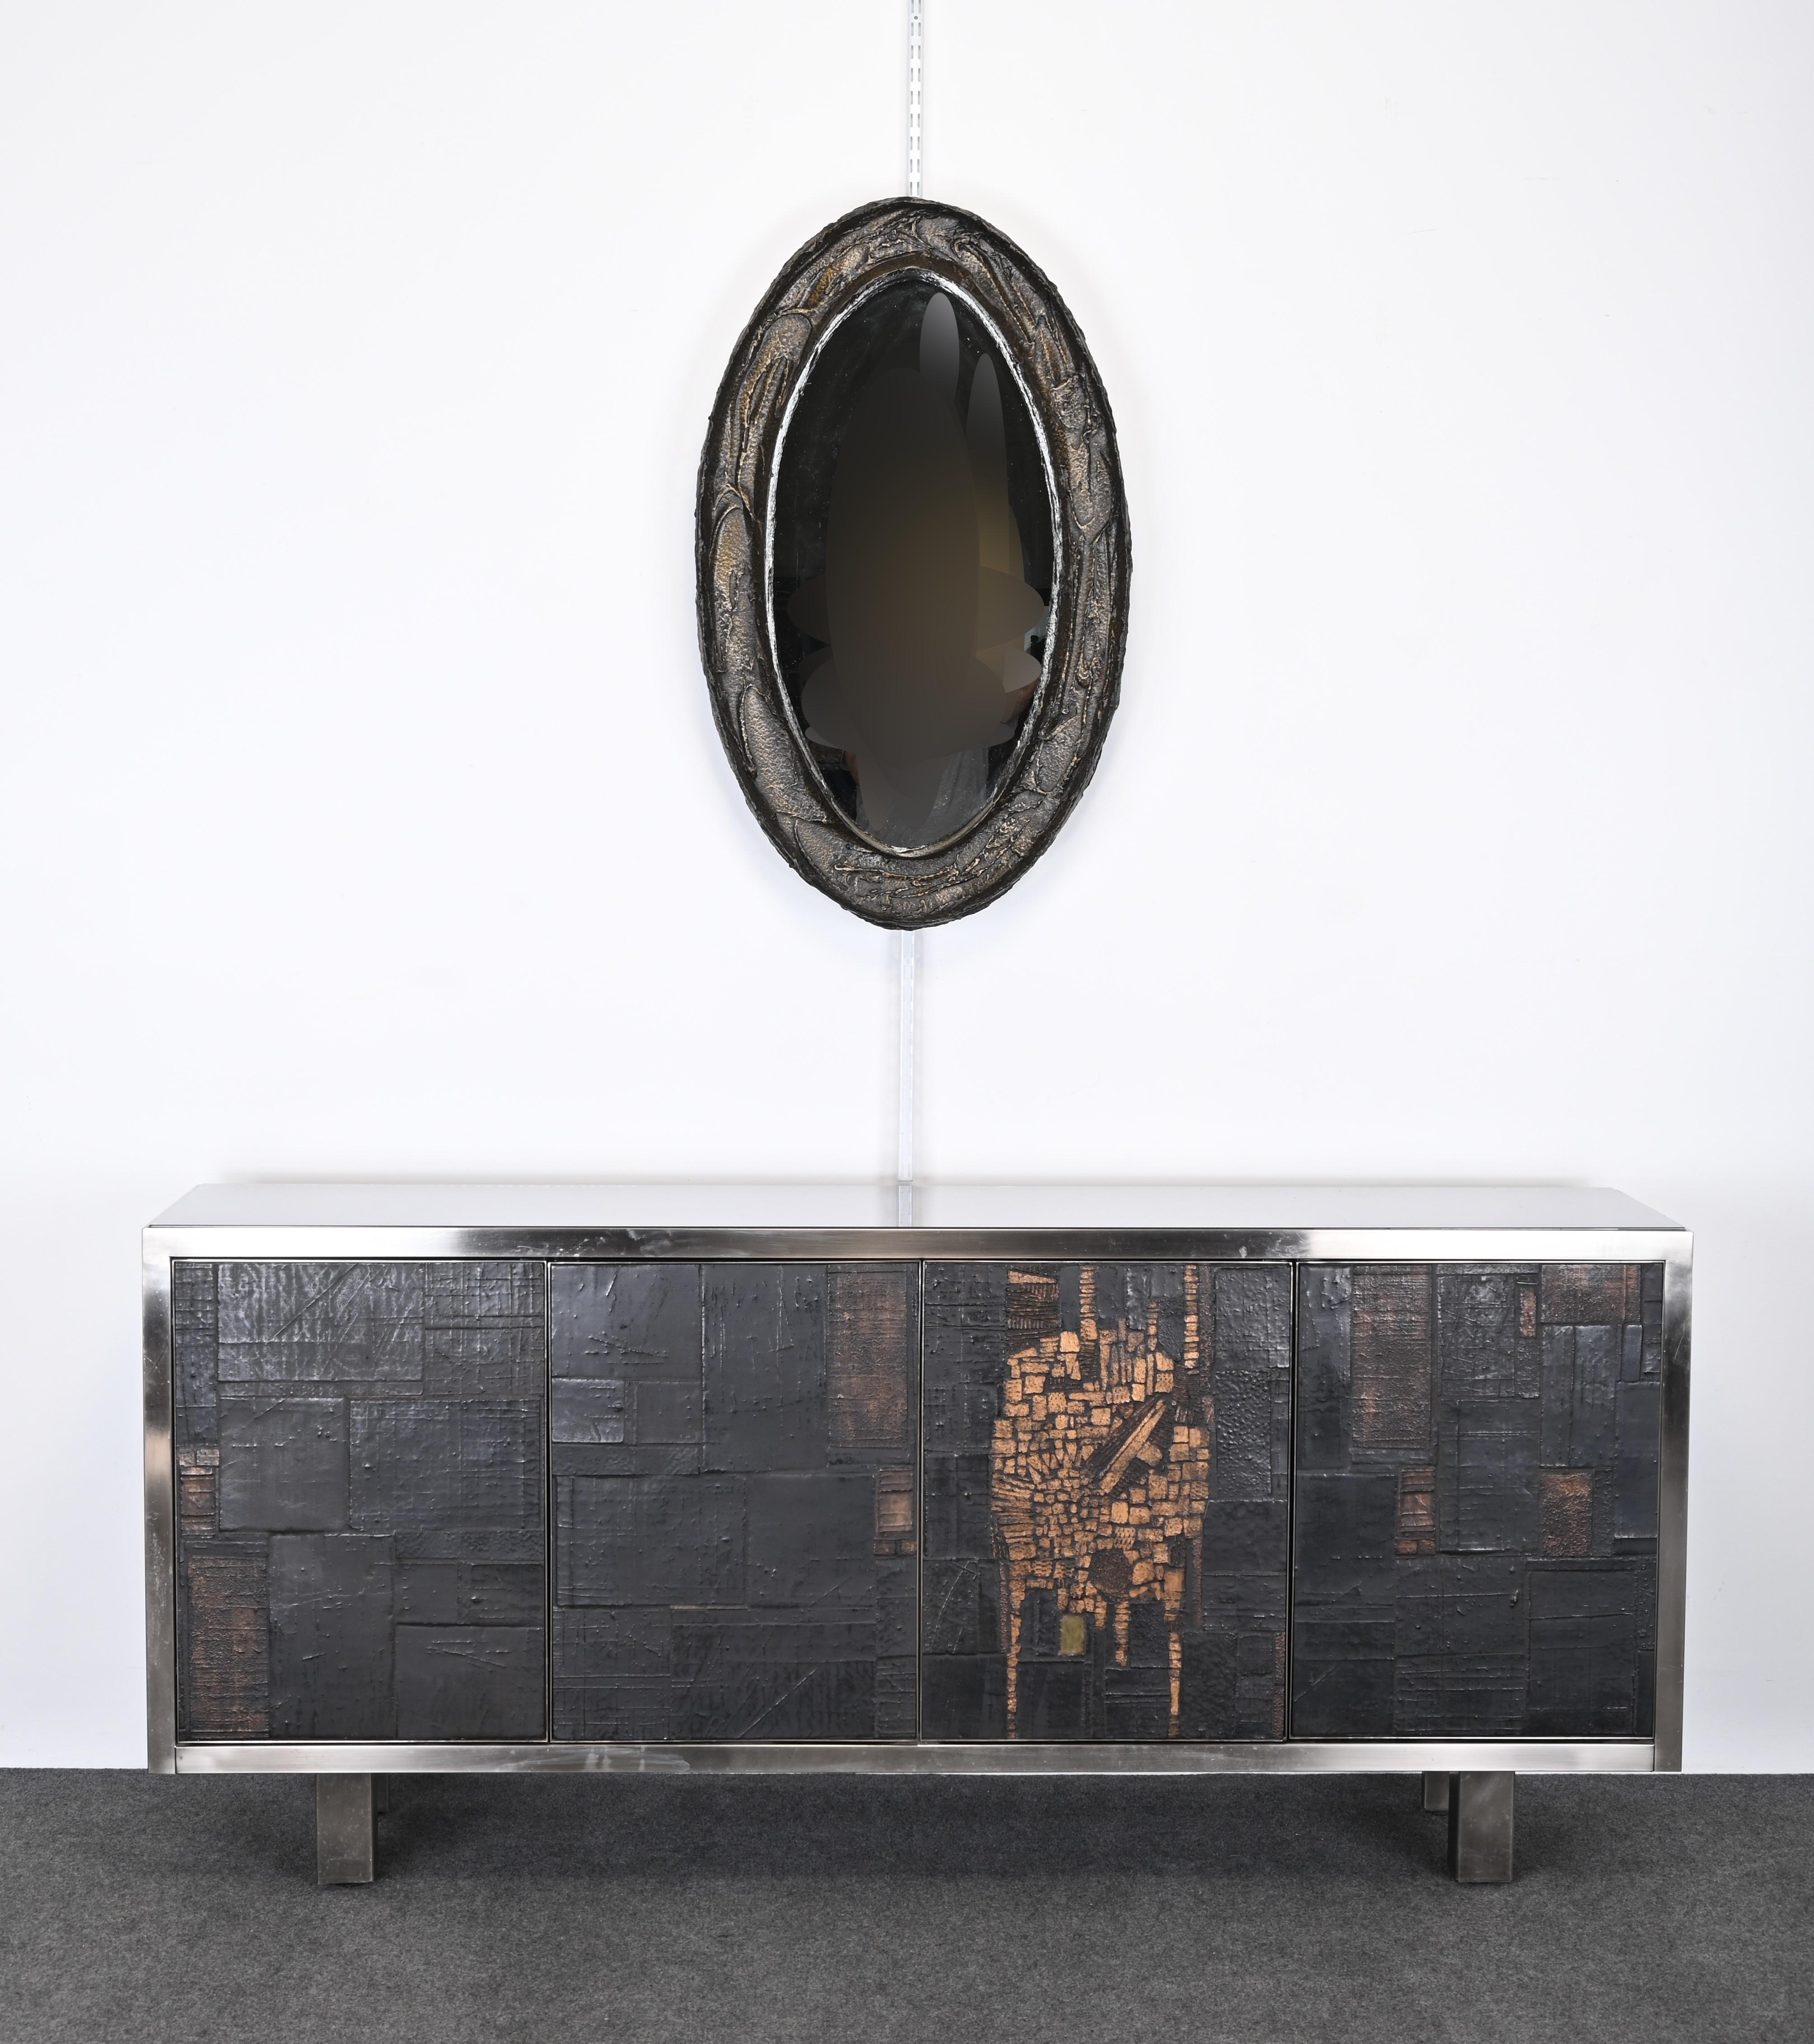 A Brutalist or Le Brutalisme sculpted bronze resin Wall Mirror by Paul Evans. The decorative mirror would look great in any Mid-Century Modern or Contemporary interior decorated with Brutalist furniture from the Mid-20th Century.  The sculpted